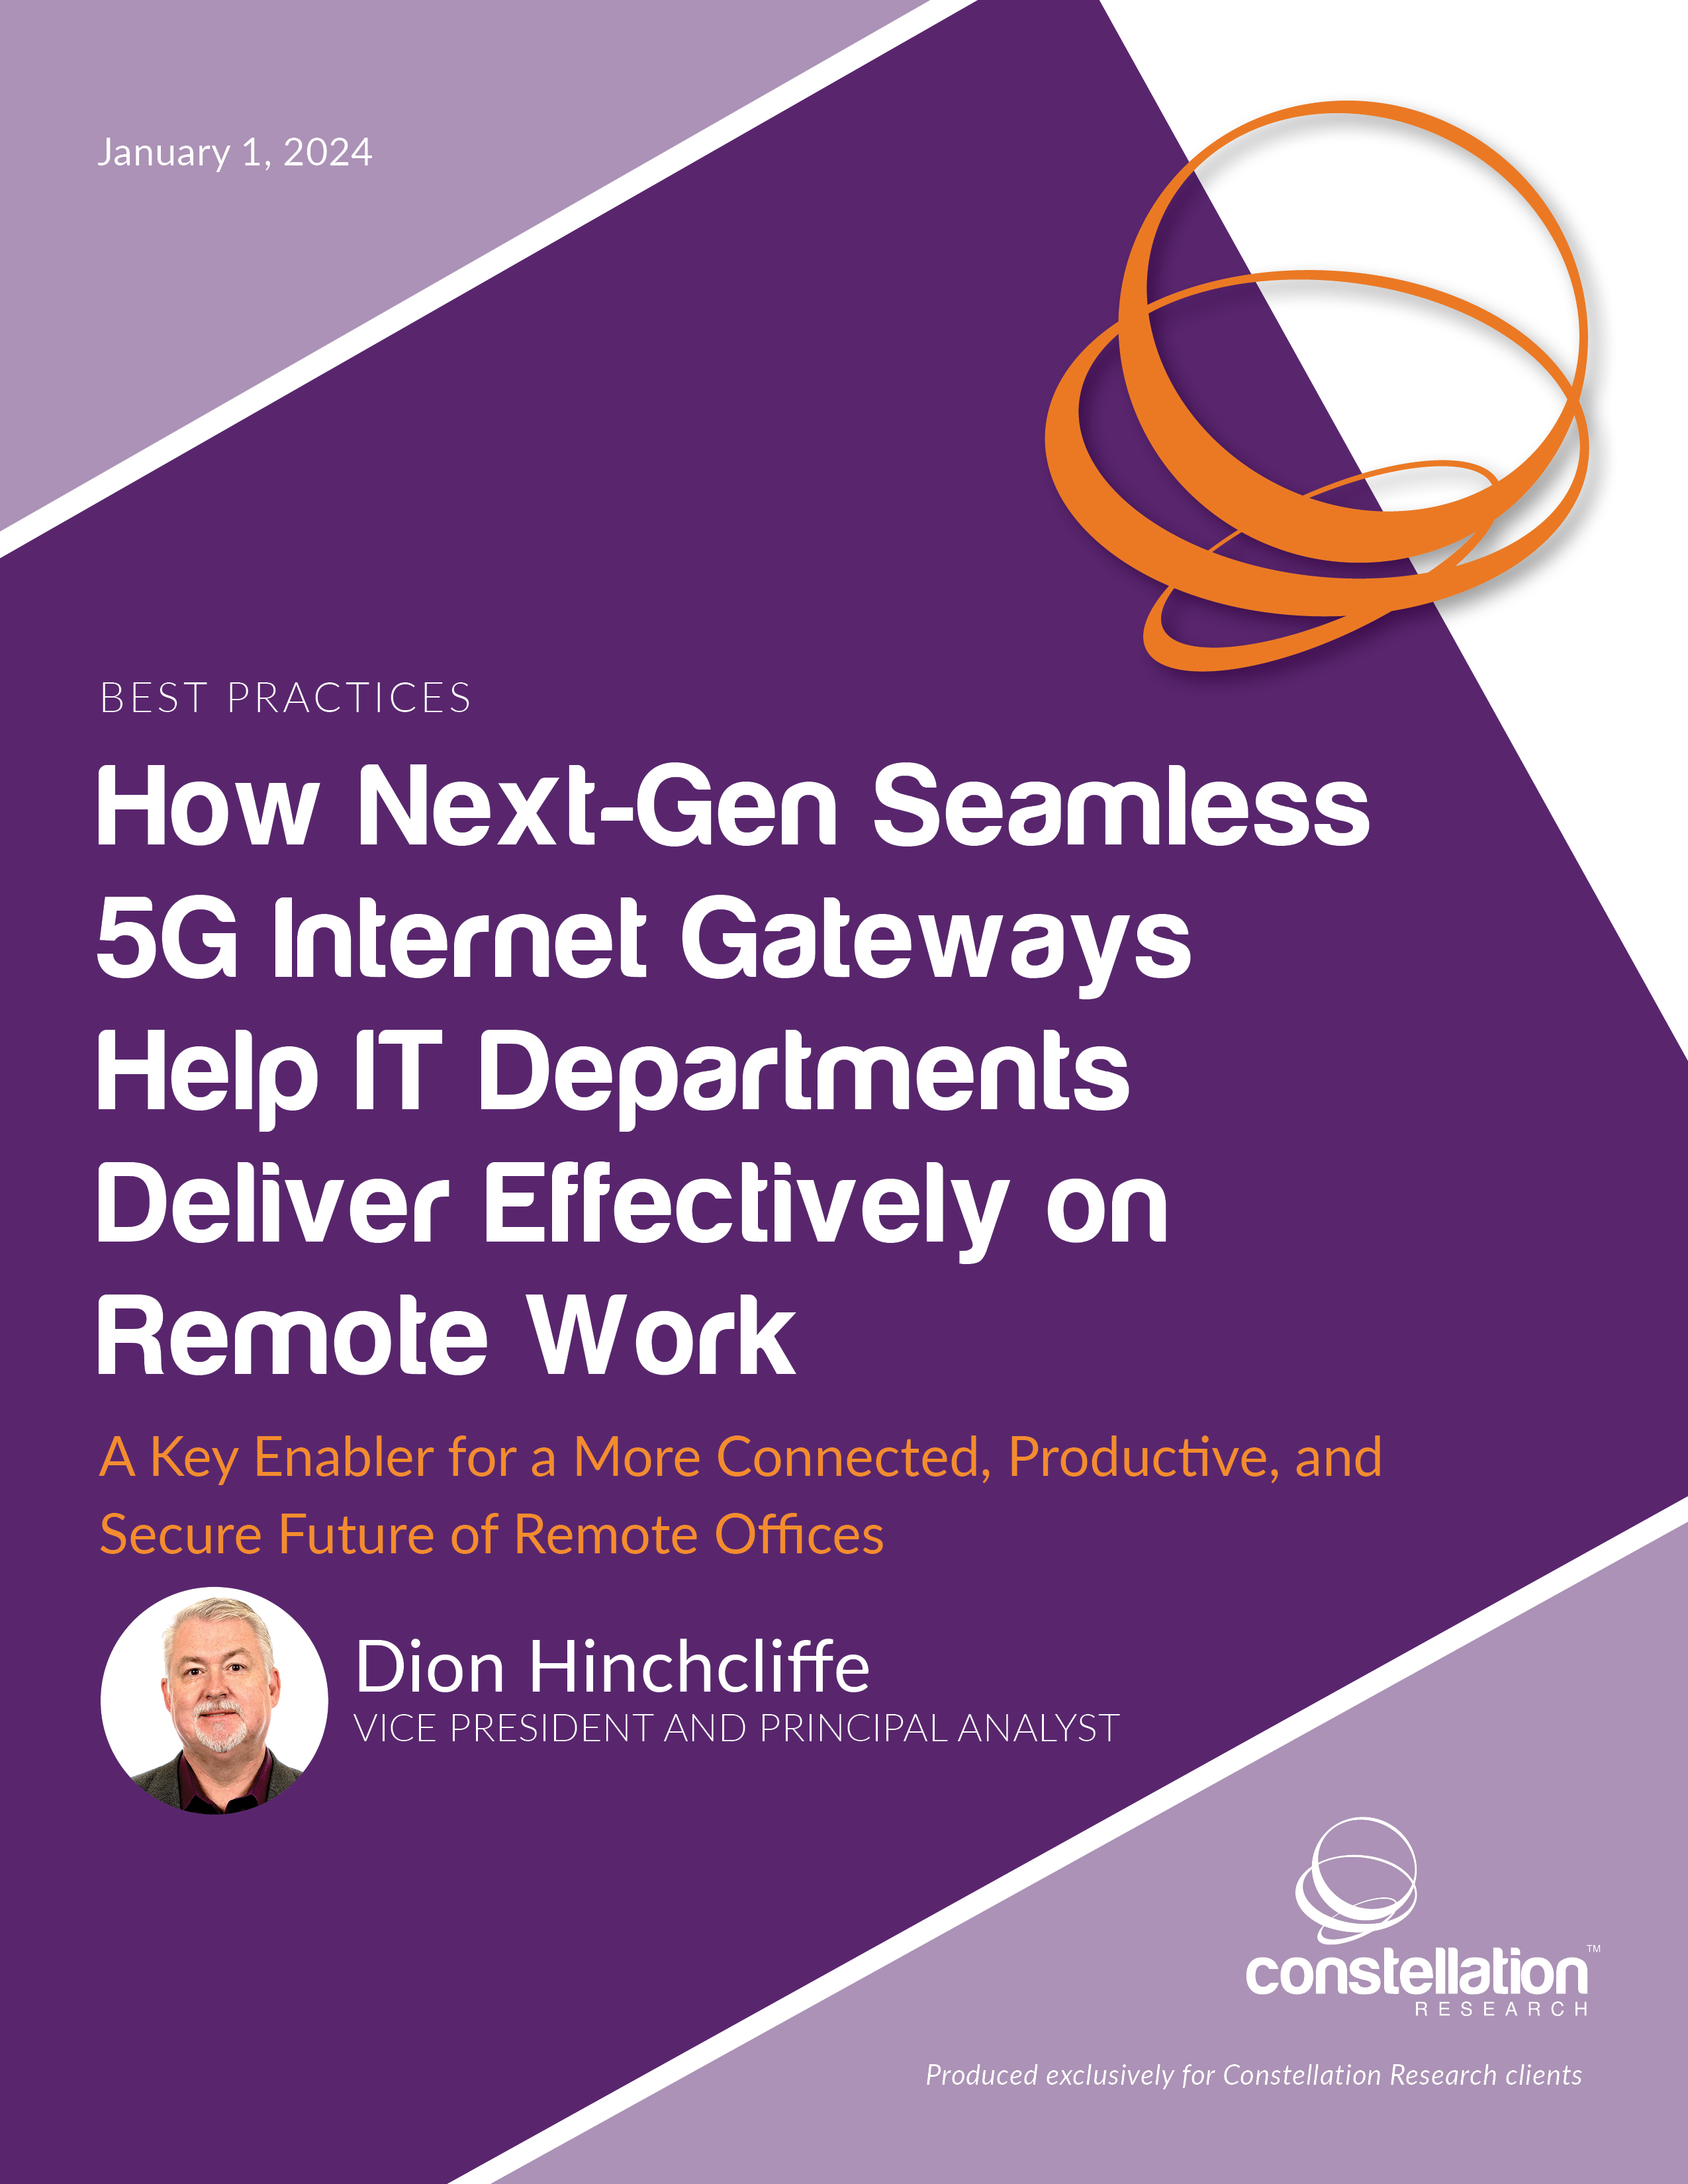 How Next-Gen Seamless 5G Internet Gateways Help IT Departments Deliver Effectively on Remote Work by Dion Hinchcliffe